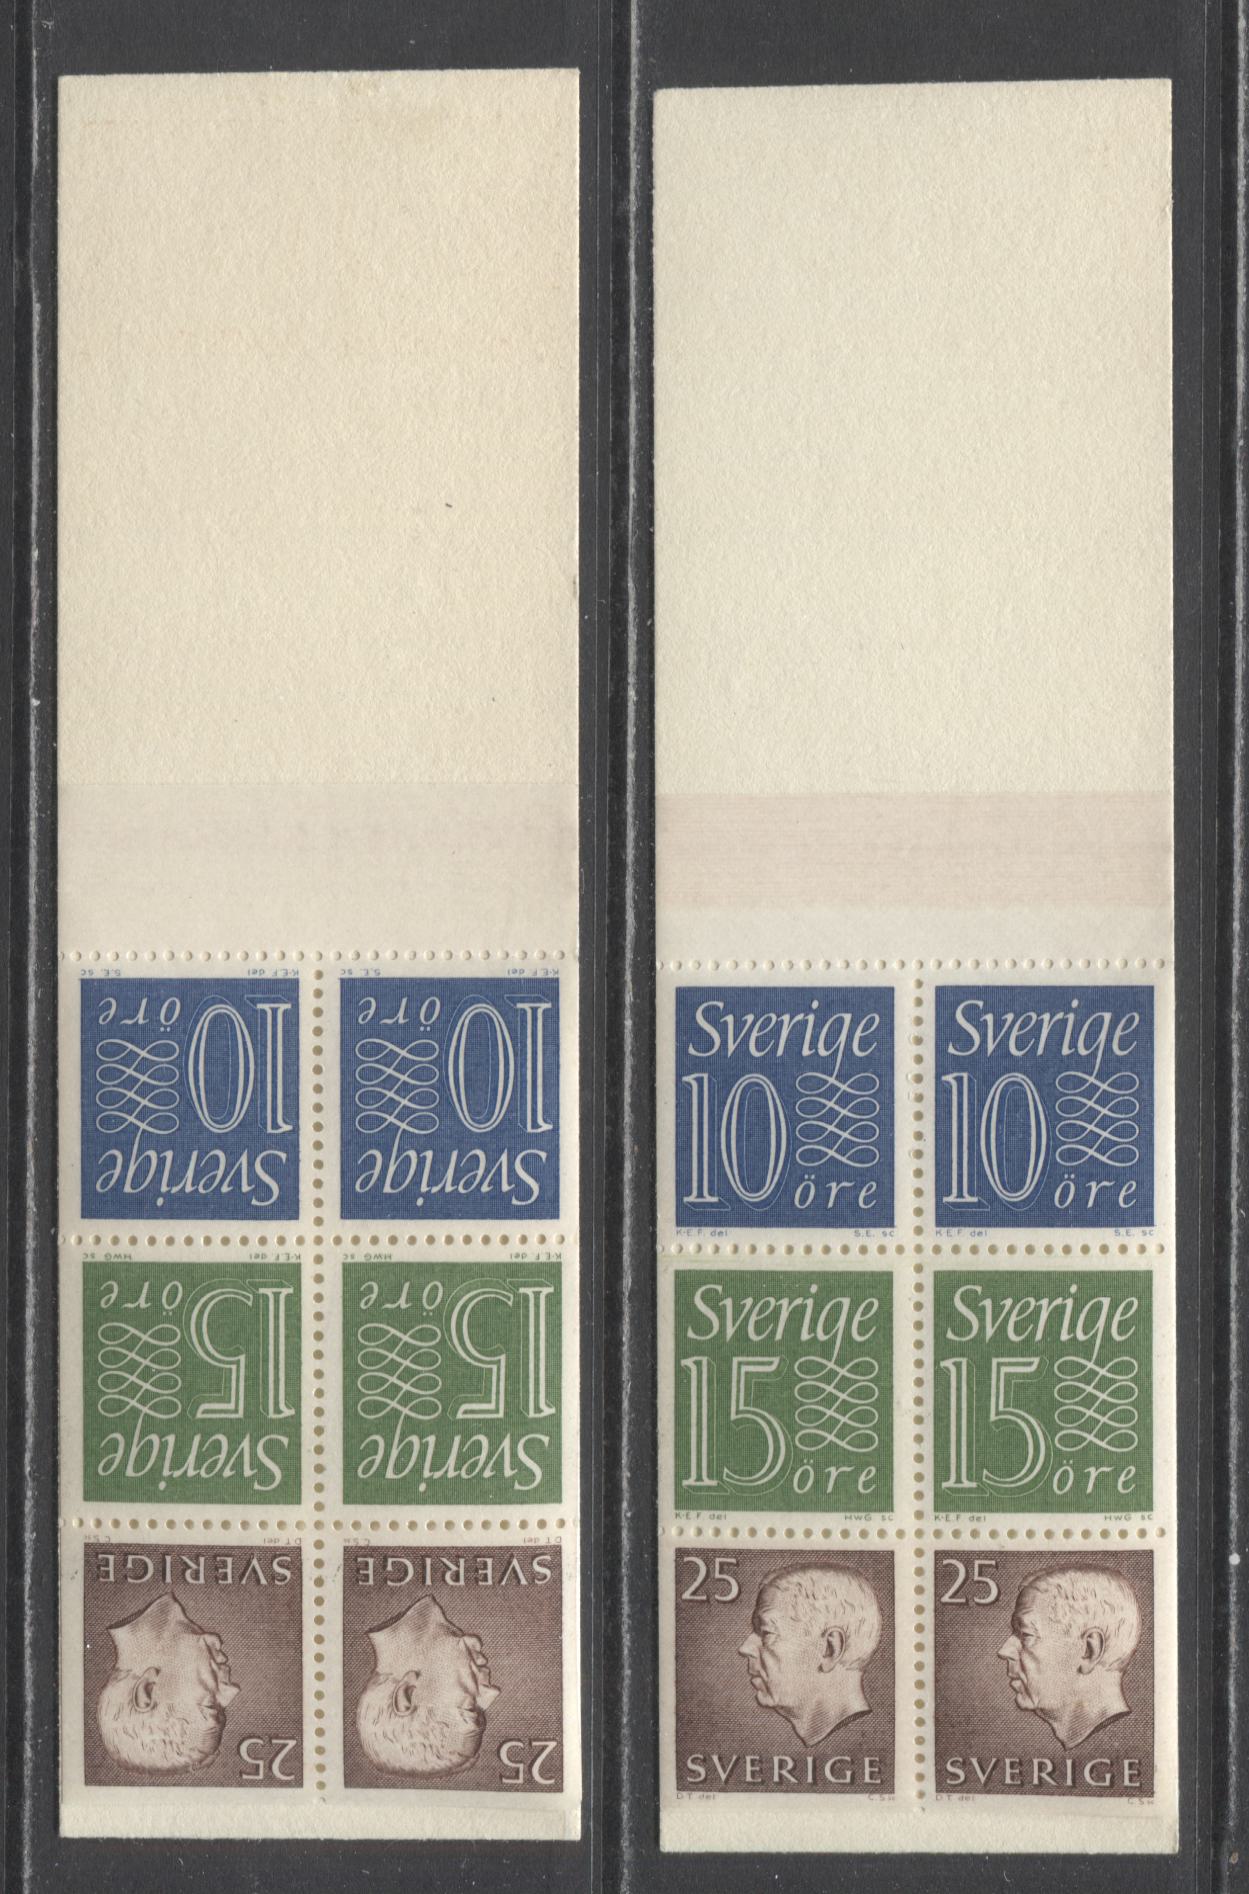 Lot 153 Sweden SC#580a (Facit #HA14A2R/A2O) 1965 Re-Engraved King Gustav VI Adolf Definitive Issue, 3-Line Text and Doves Back Cover, Inverted And Upright Panes, Blank Selvedge, Repeating Text on Front Cover, Estimated Value $10